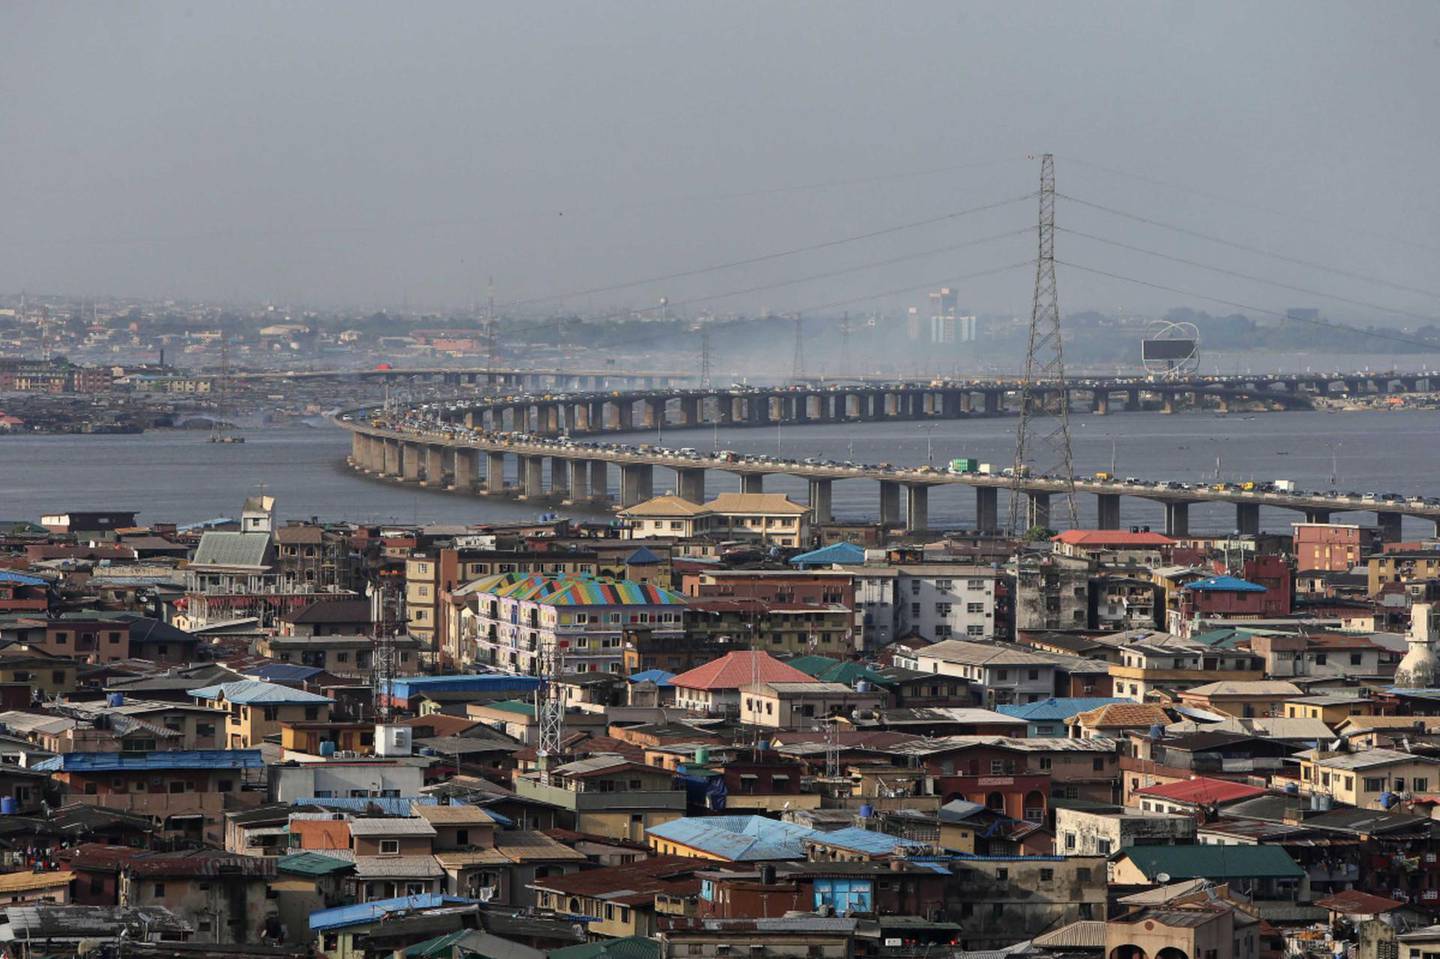 An electricity pylons carries power cables above residential property as traffic passes across a bridge from Isale Eko on Lagos Island towards the mainland in Lagos, Nigeria, on Monday, Oct. 26, 2015. Nigeria plans to create a $25 billion fund with public and private financing to modernize infrastructure and avoid a recession, Vice President Yemi Osinbajo said. Photographer: George Osodi/Bloomberg